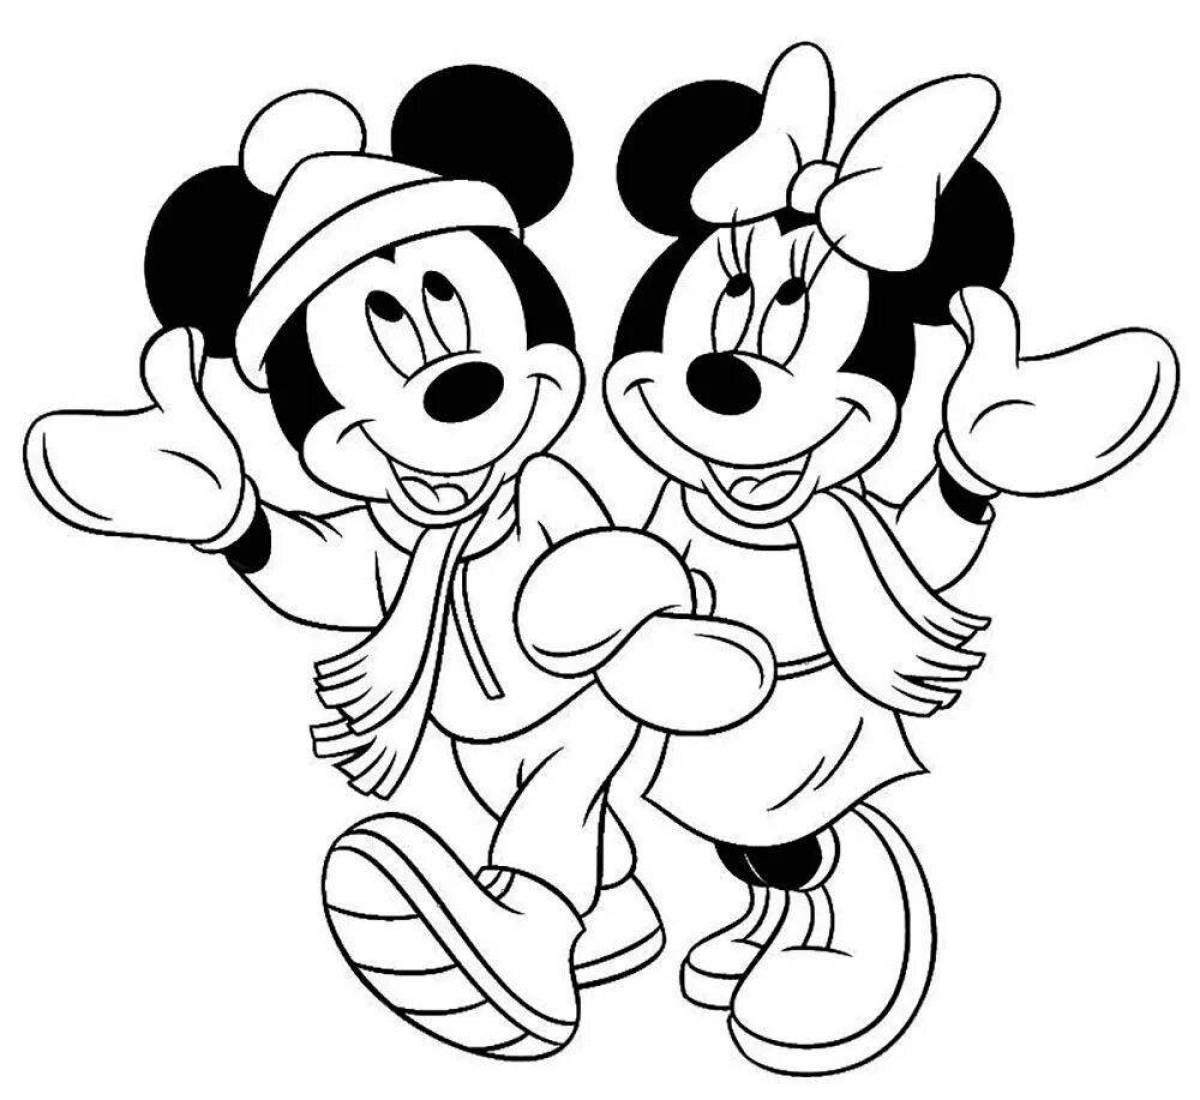 Fancy Minnie Mouse coloring book for kids